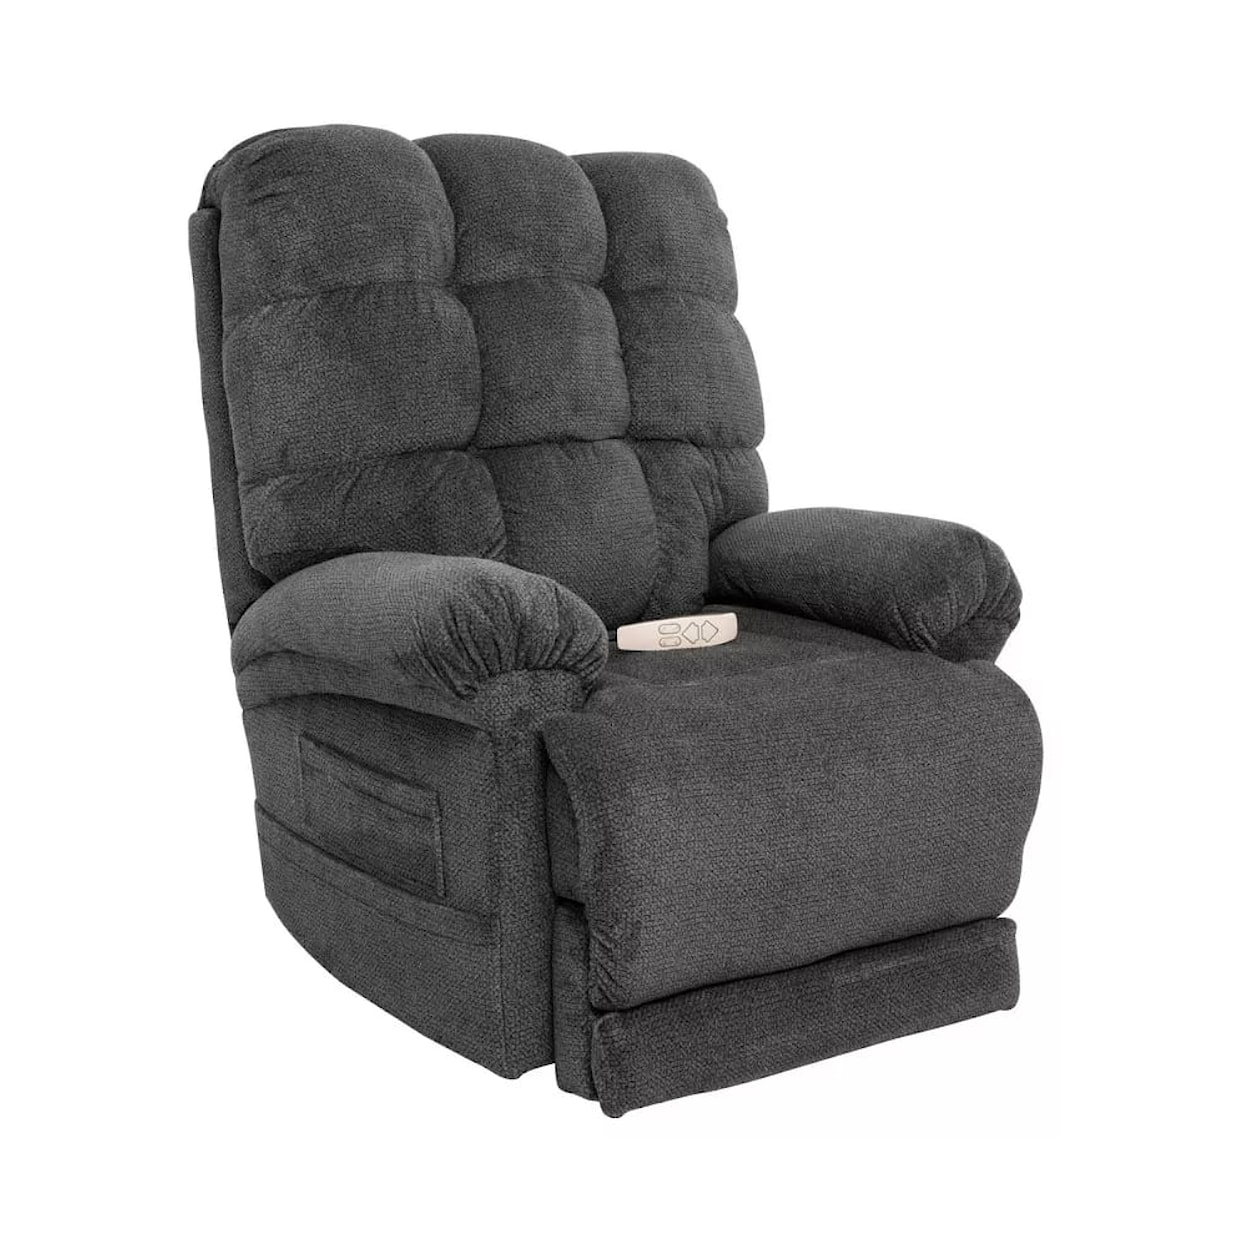 Windermere Motion Lift Chairs LIFT RECLINER